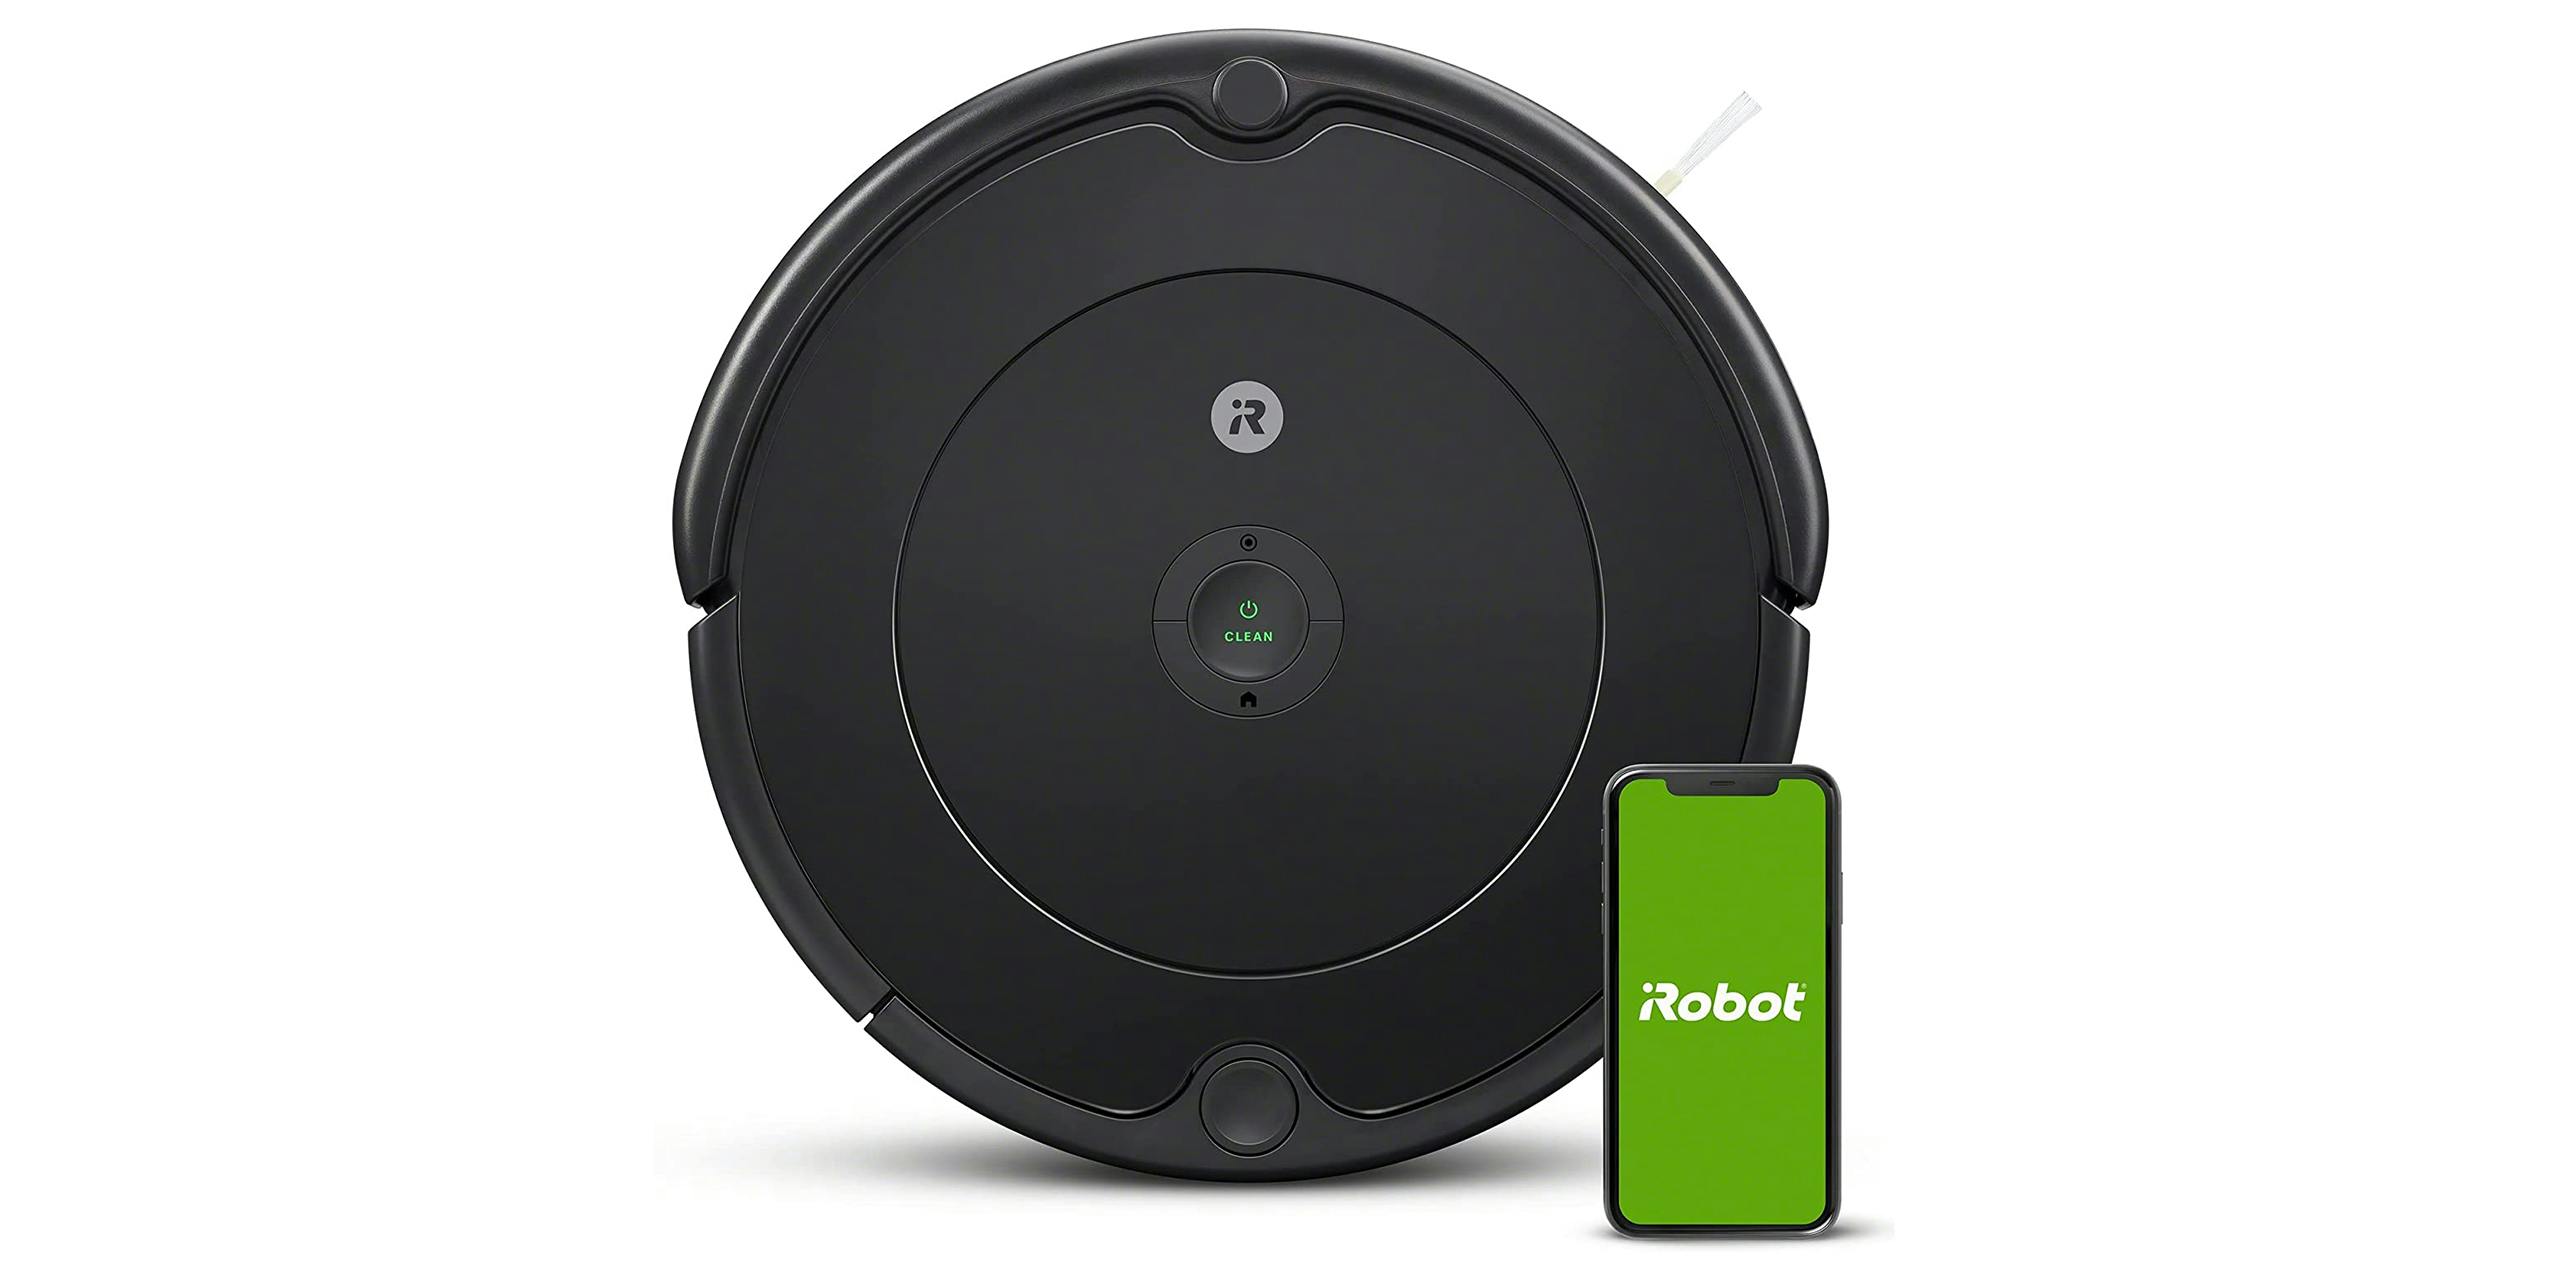 Roomba 692 along with it's companion app.